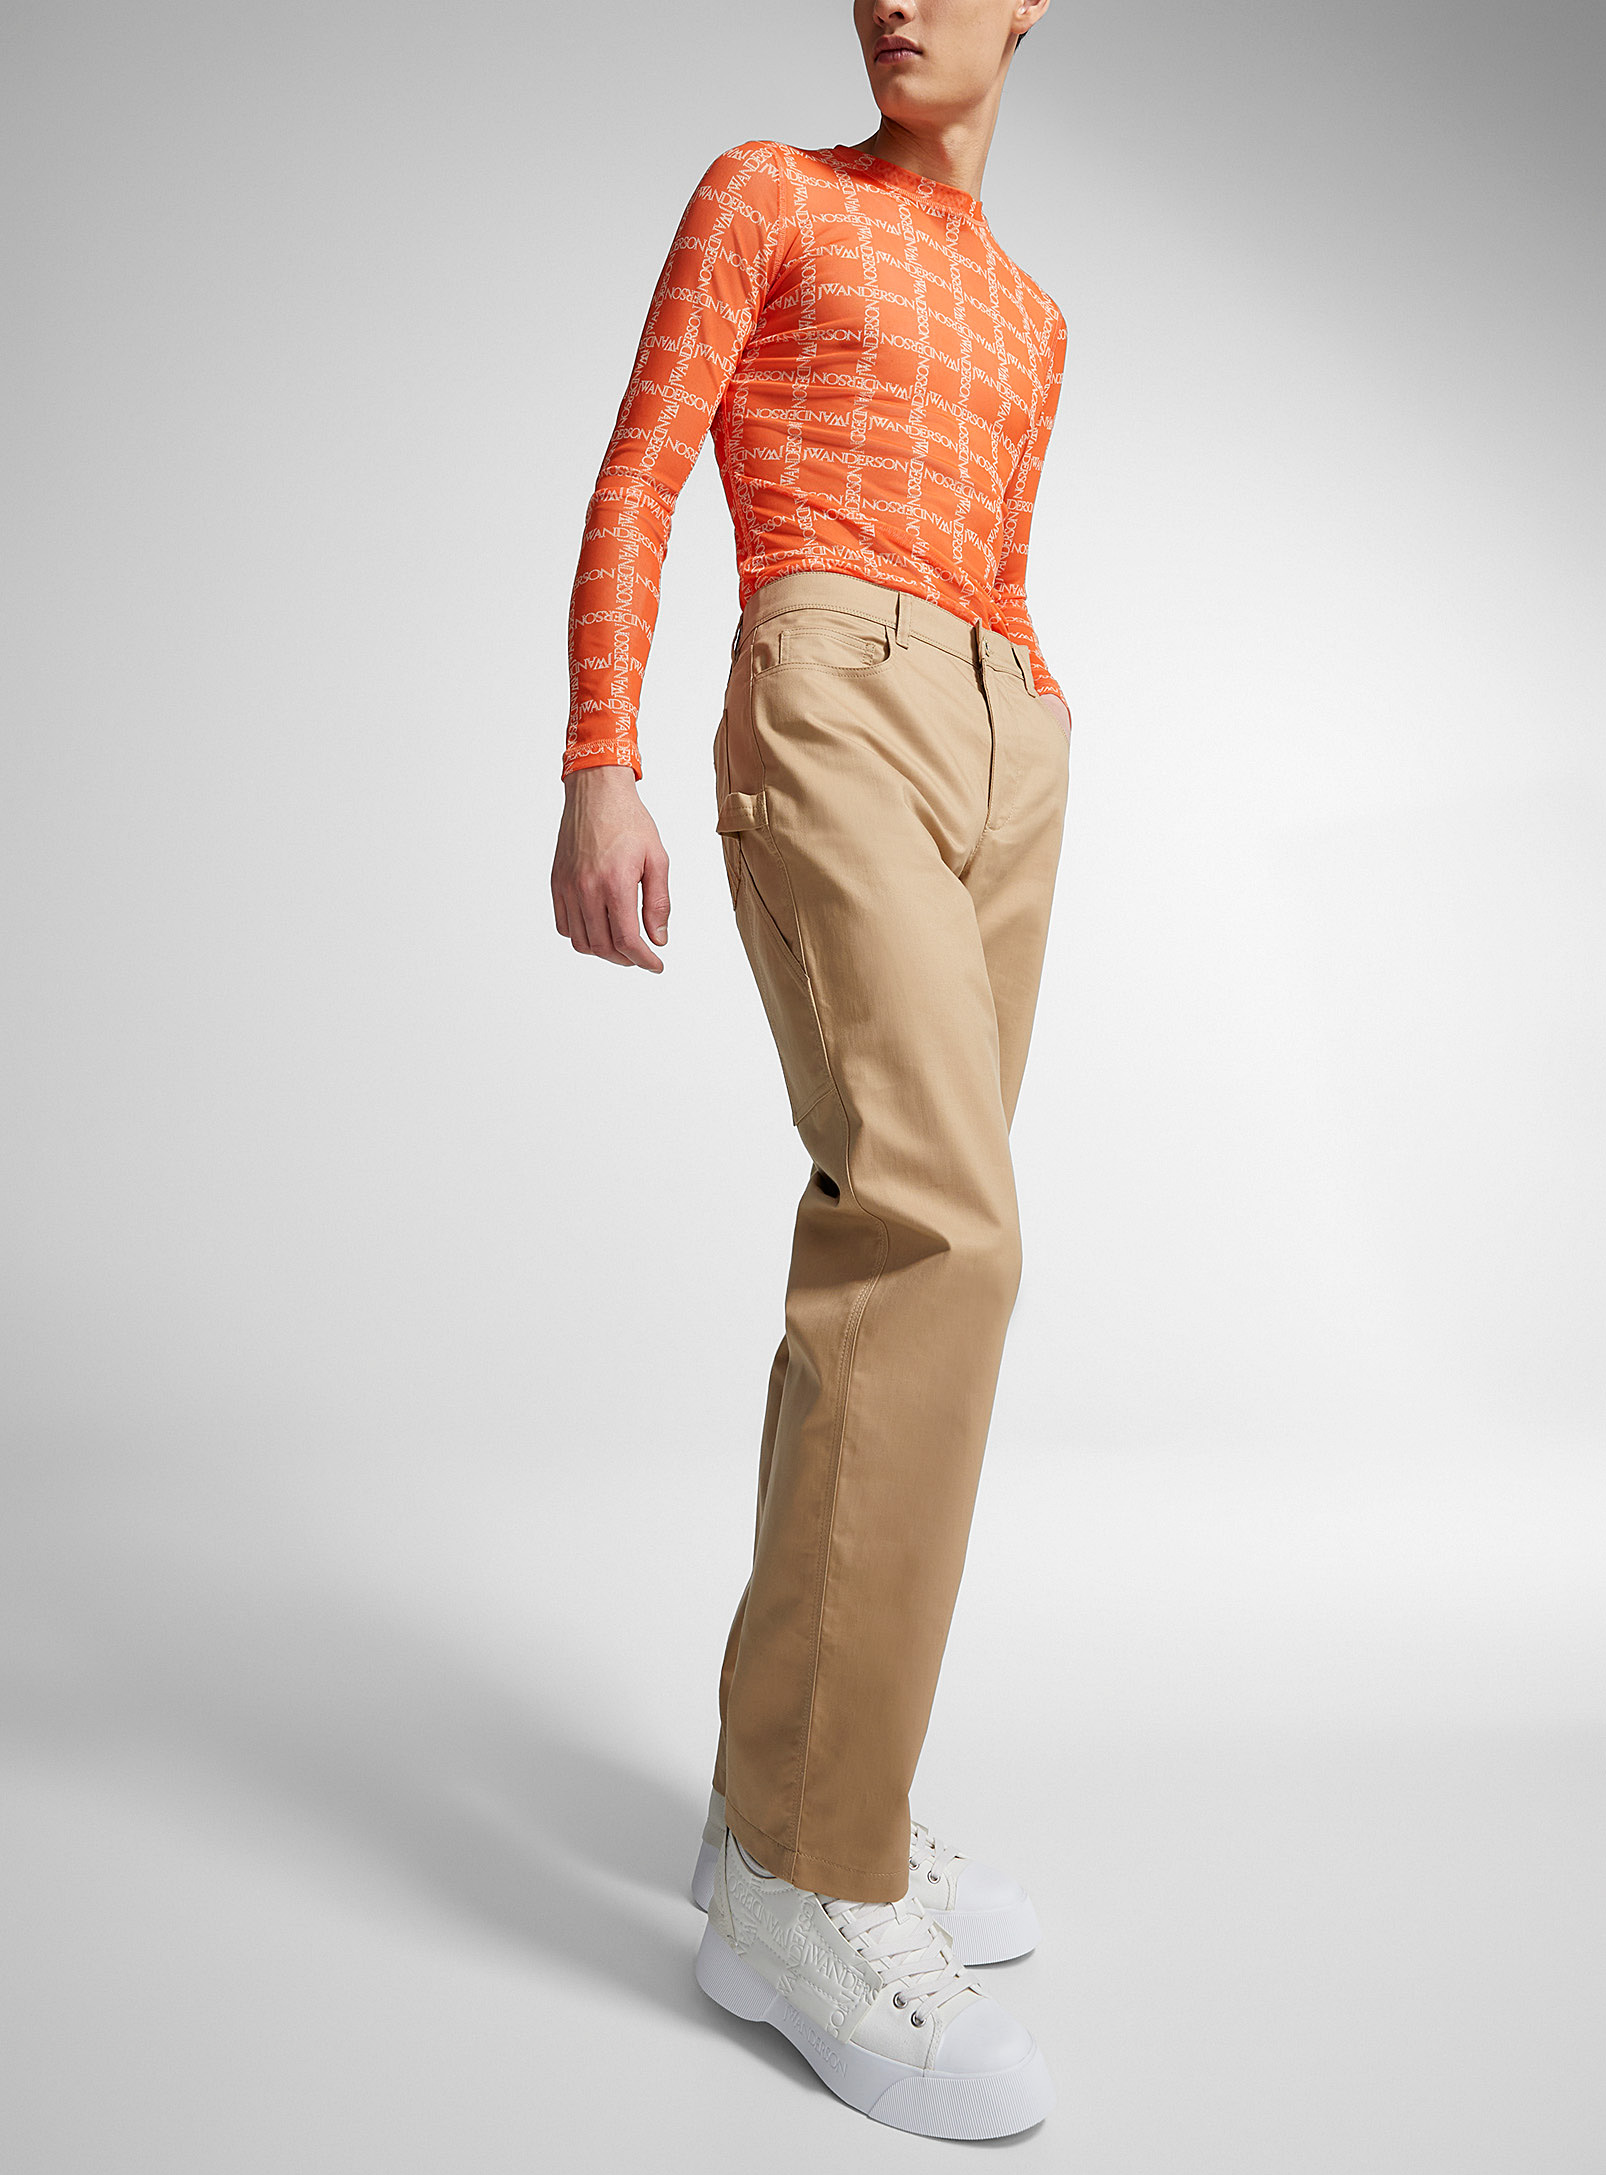 JW Anderson - Men's Carpenter-style chinos